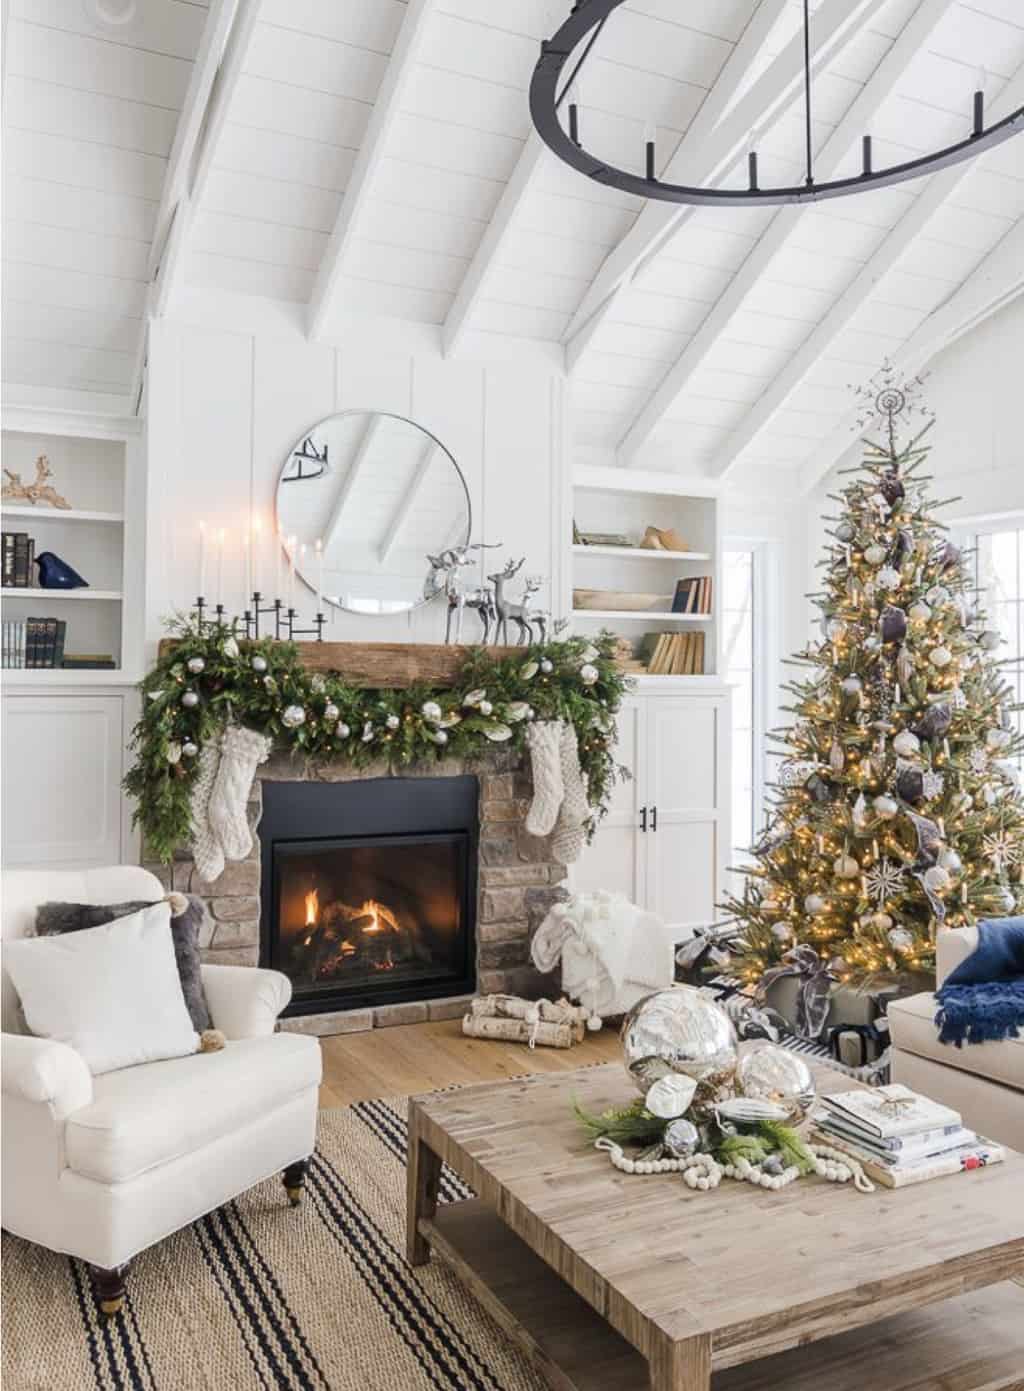 10 Common Christmas Decorating Mistakes to Avoid; here is your ultimate Christmas decor list to make sure you have the perfect set up this year!